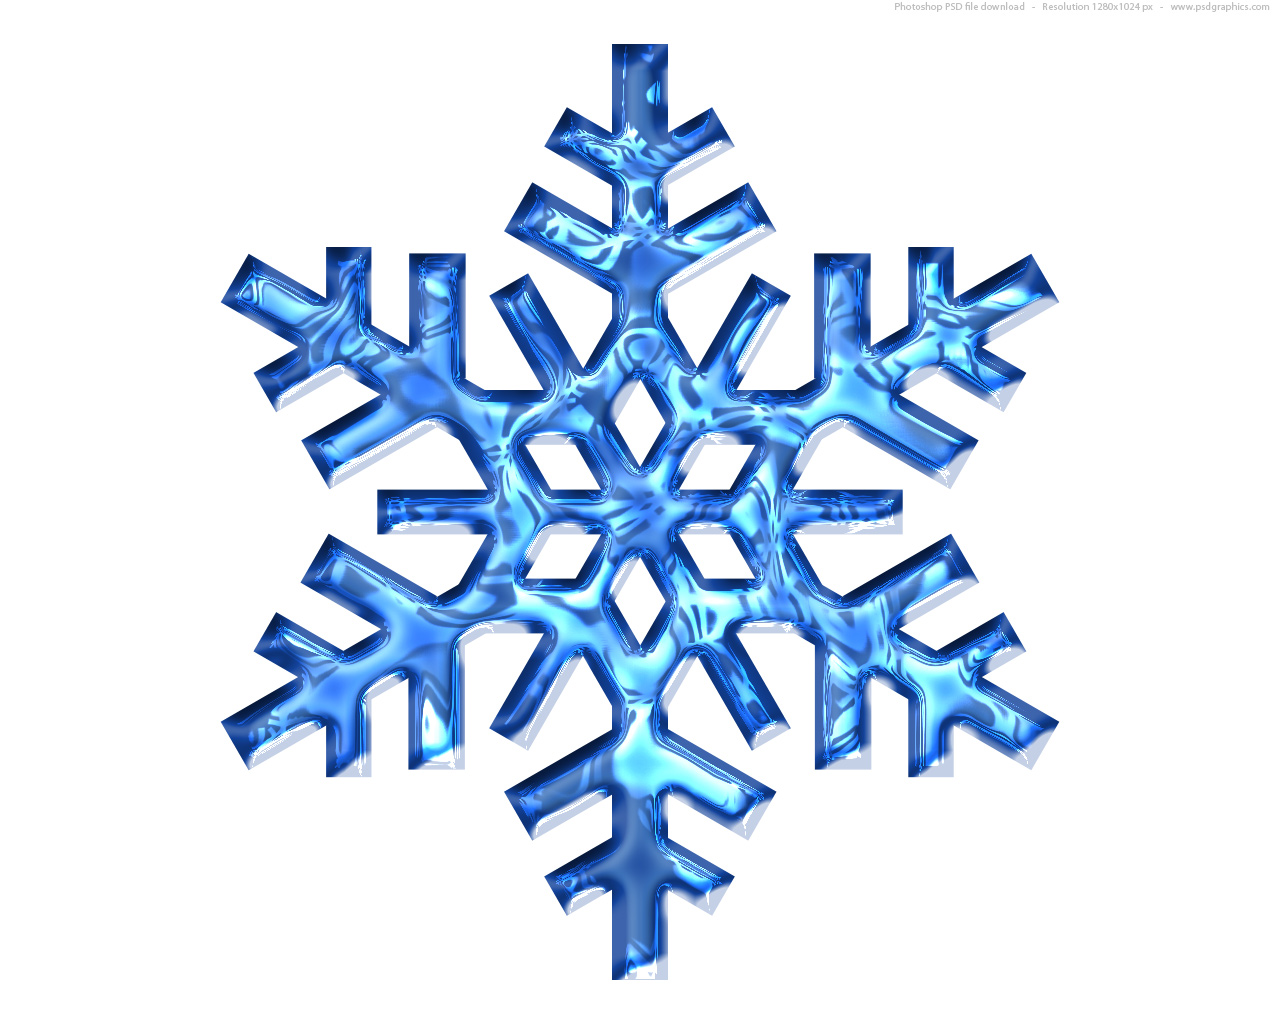 Snowflake Image Clipart - ClipArt Best